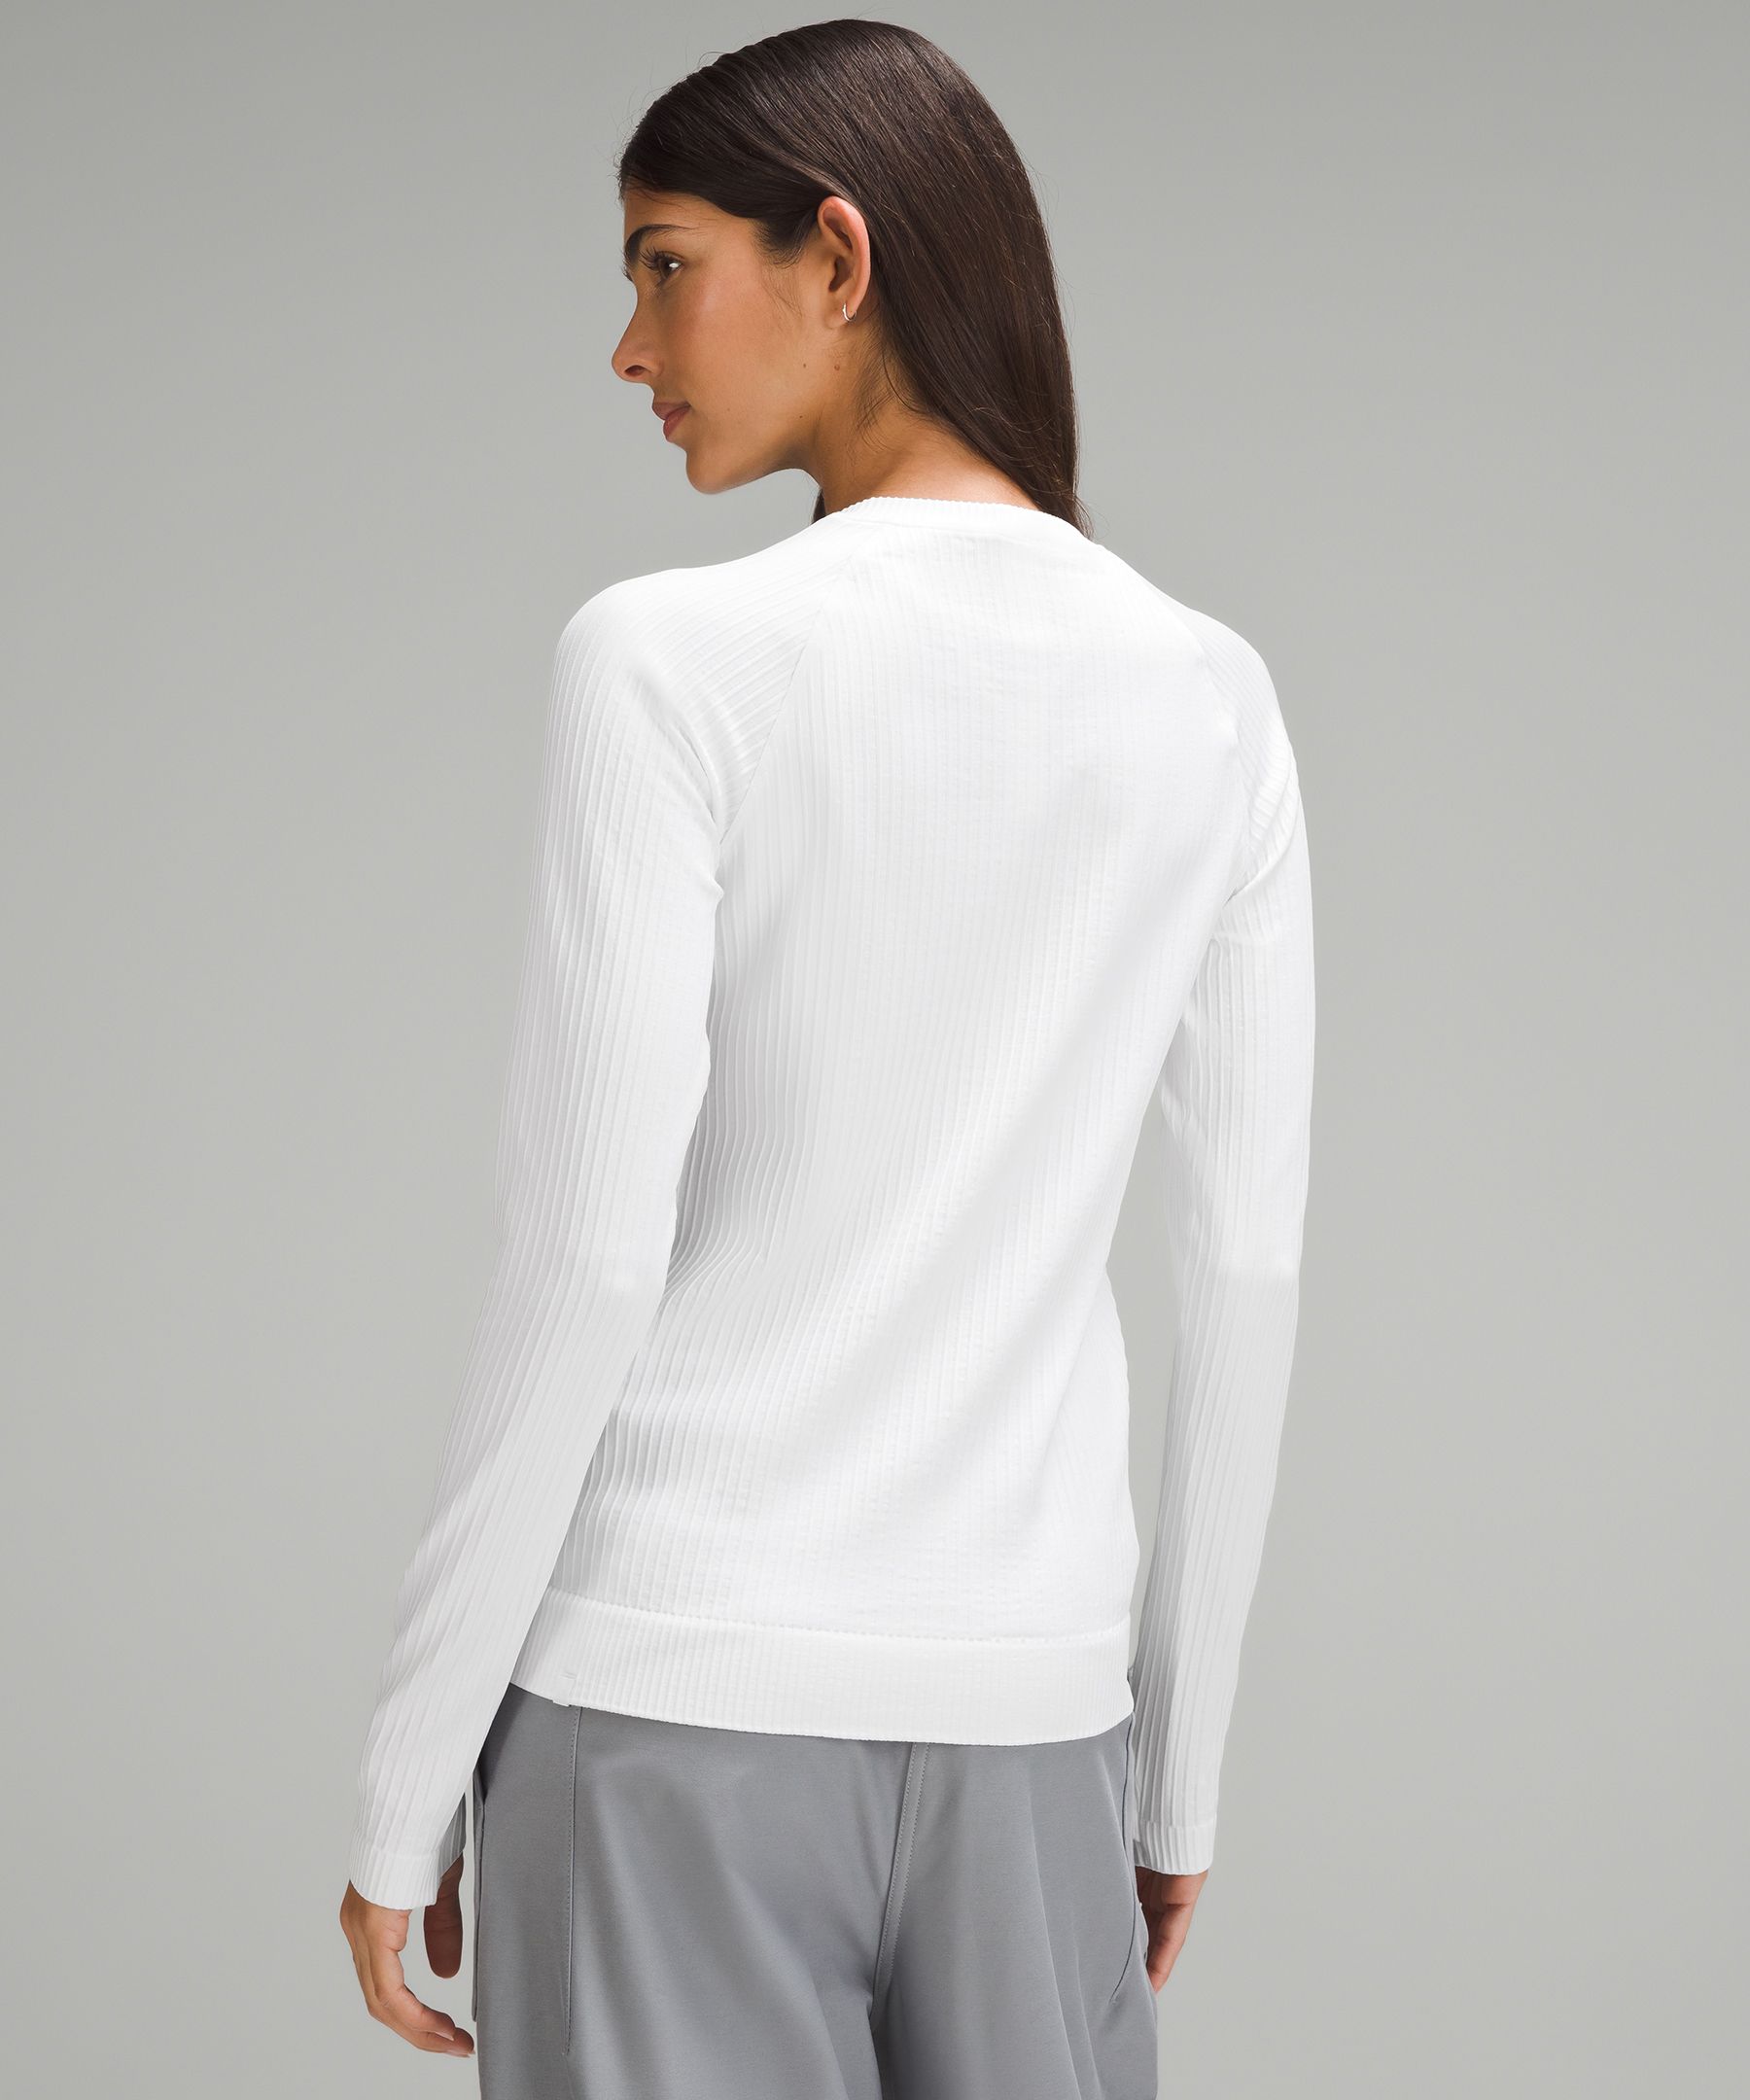 Lululemon NEW : REST LESS PULLOVER Blue Size 6 - $84 New With Tags - From  Denise